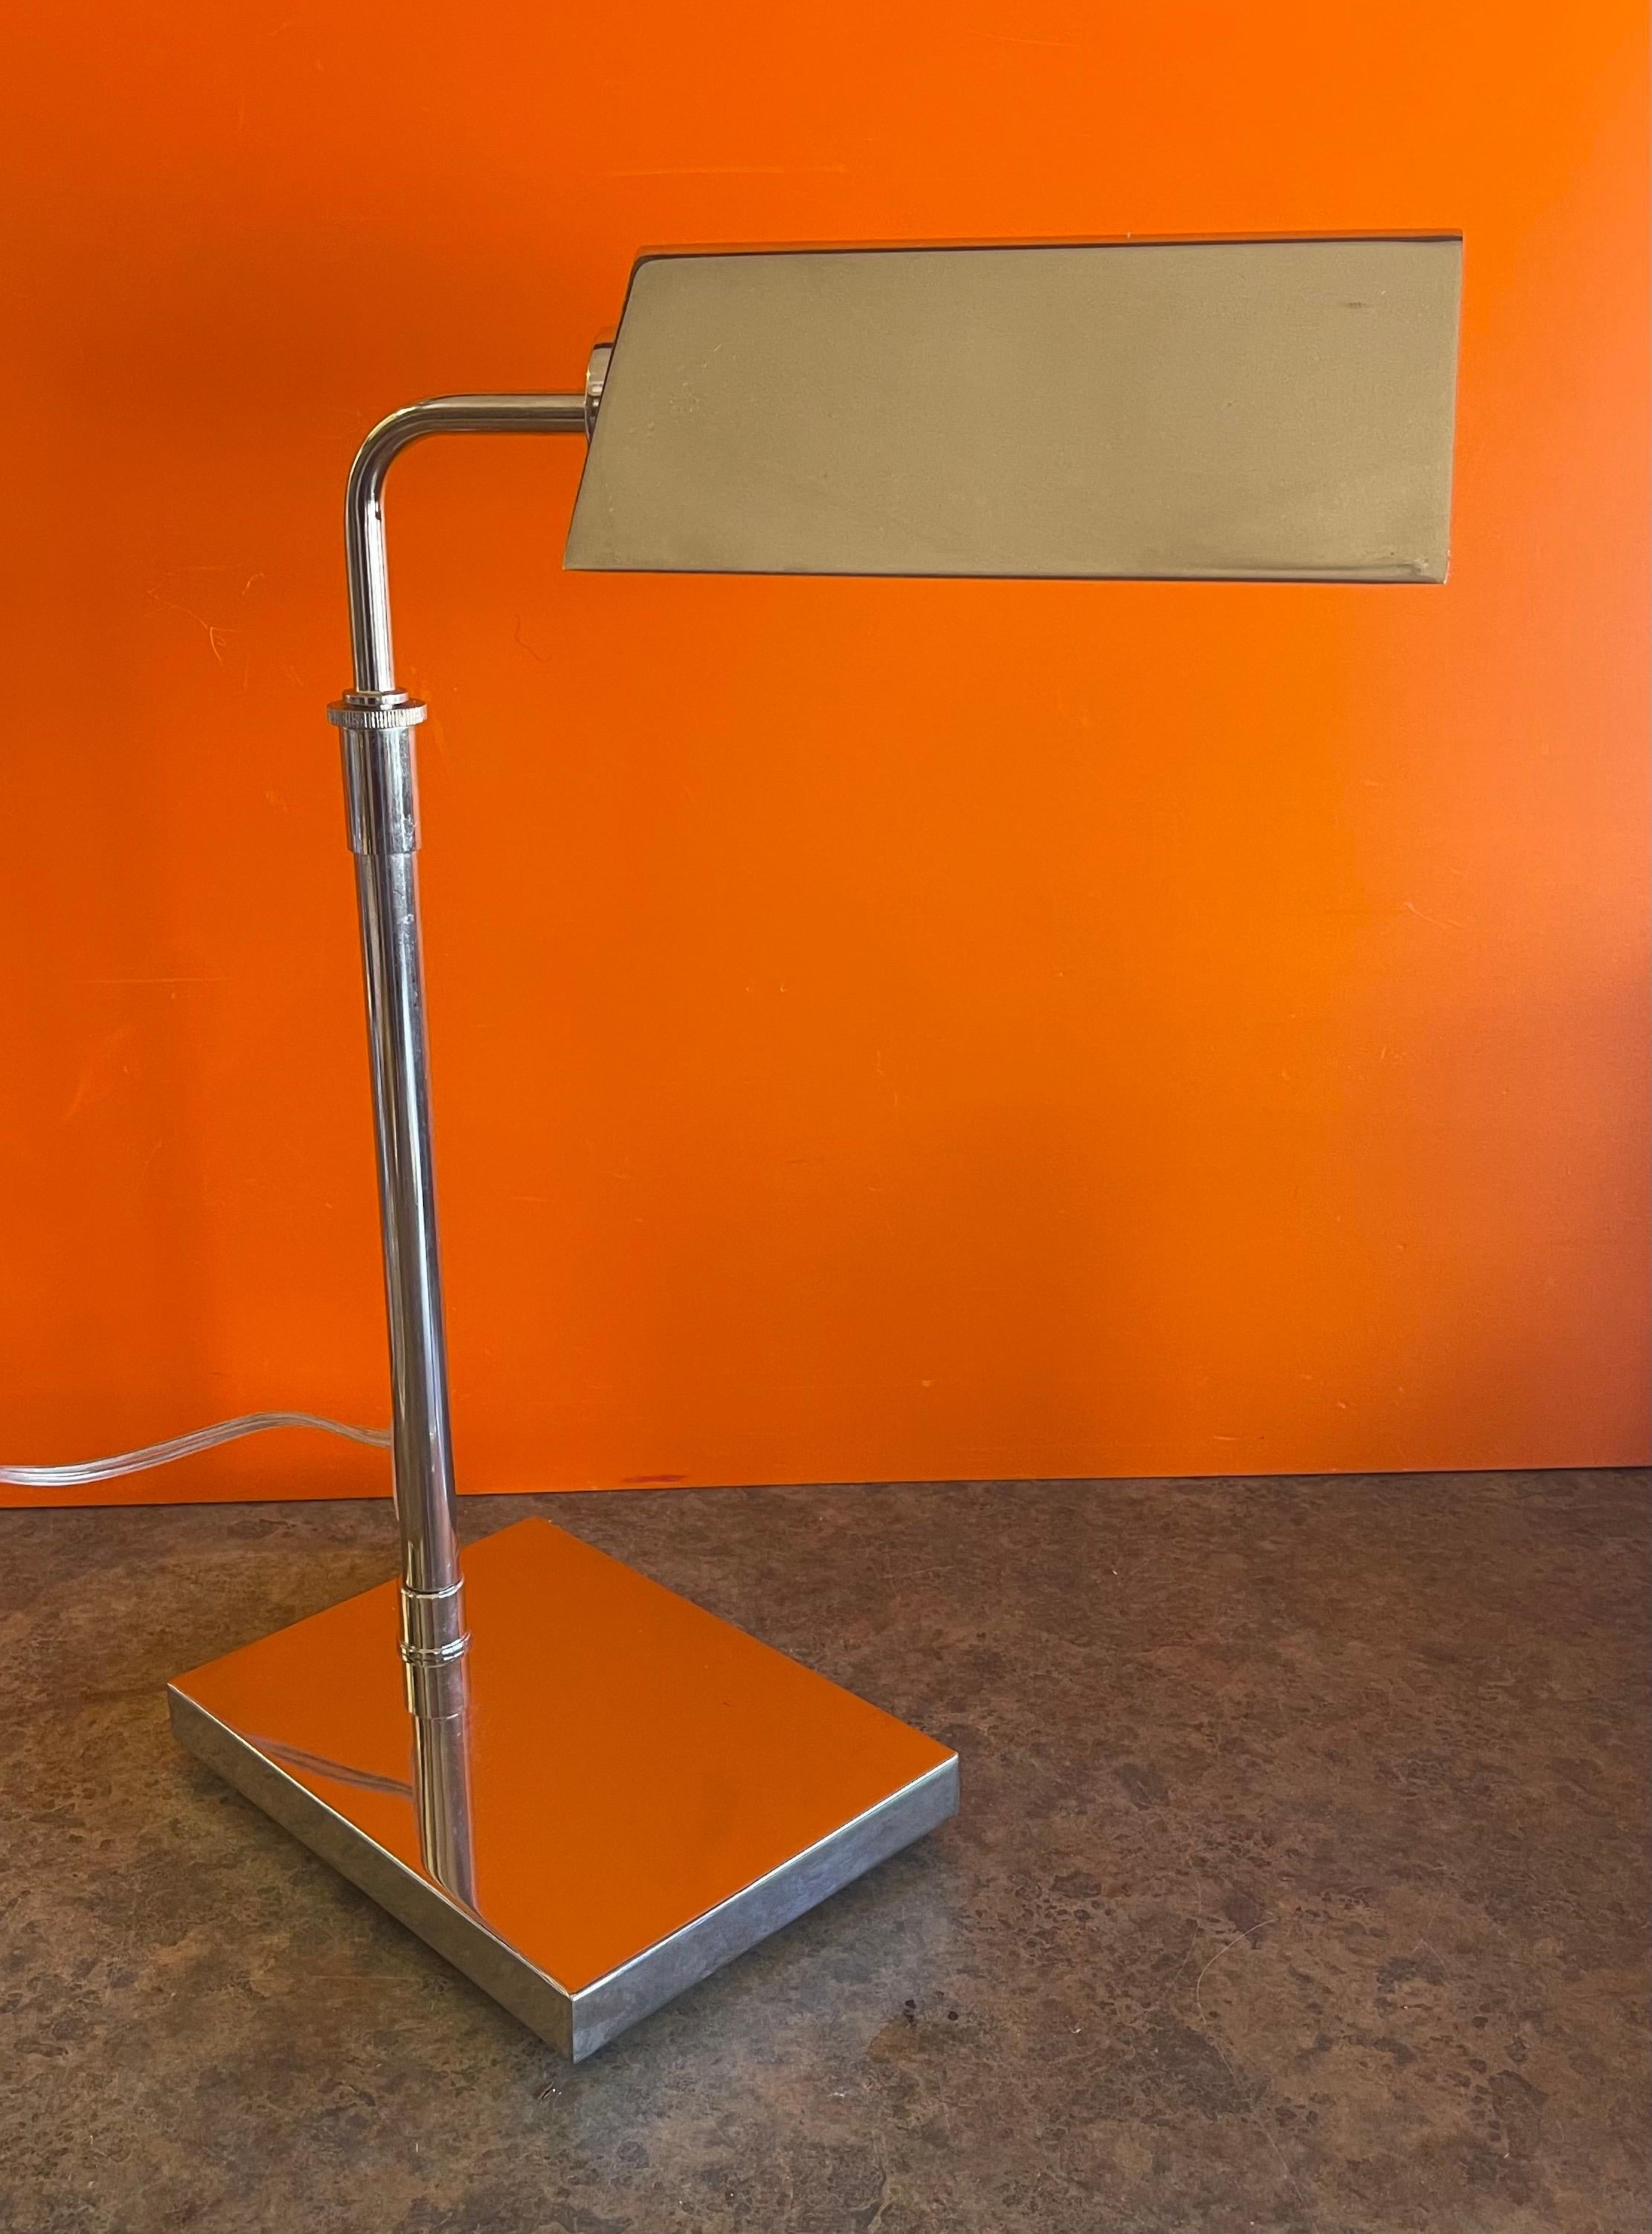 A very nice adjustable chrome pharmacy table lamp with a tented shade by Ralph Lauren, circa 2000s. The telescoping lamp can adjust from 18